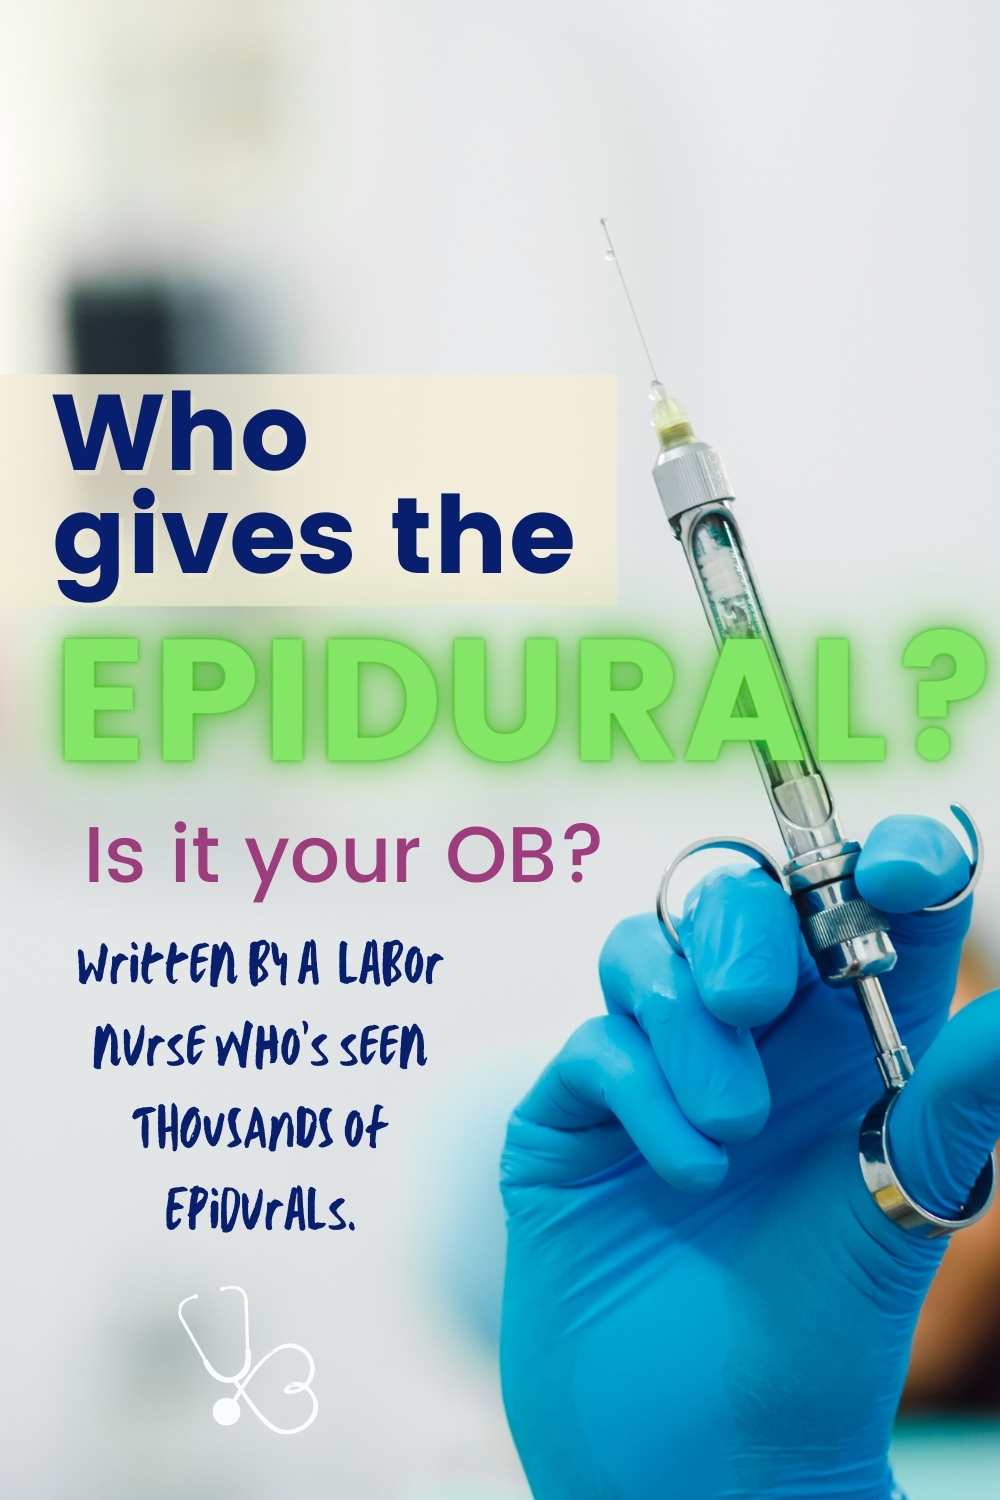 Who puts in your epidural and what types of qualifications do they need to do so? Did you know there are several types of epidurals and that changes who administers them.